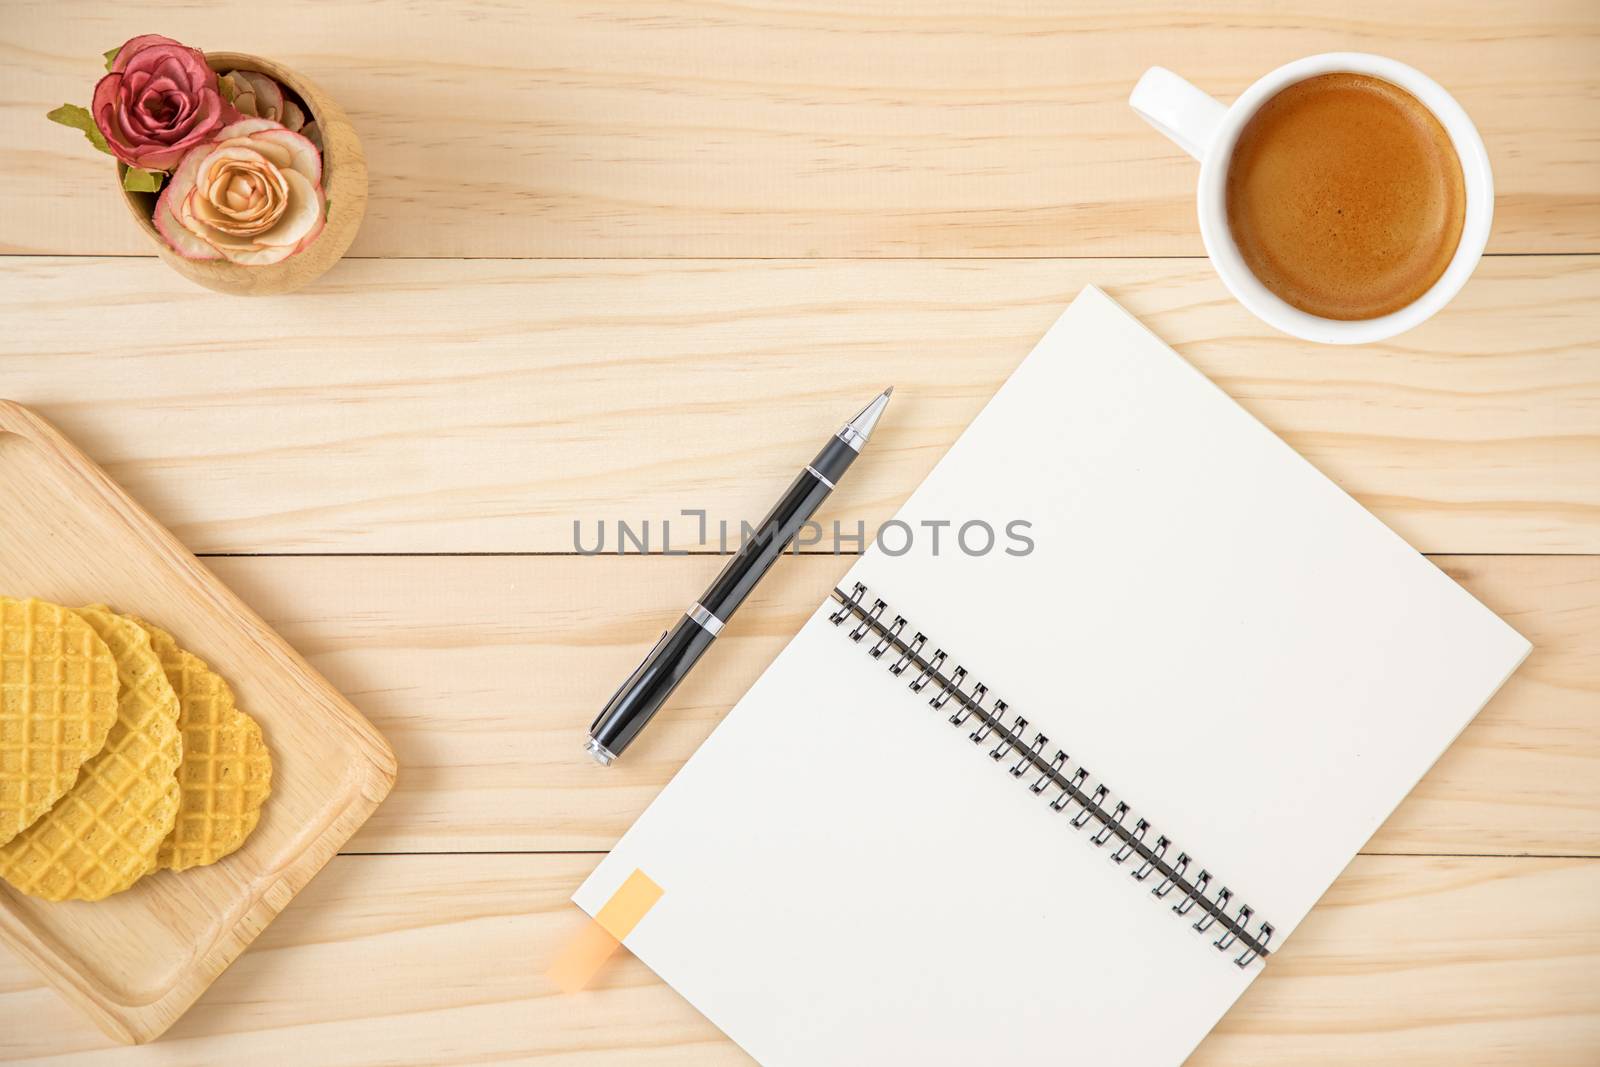 A blank notebook and a cup of coffee in white ceramic cup. Wooden background.